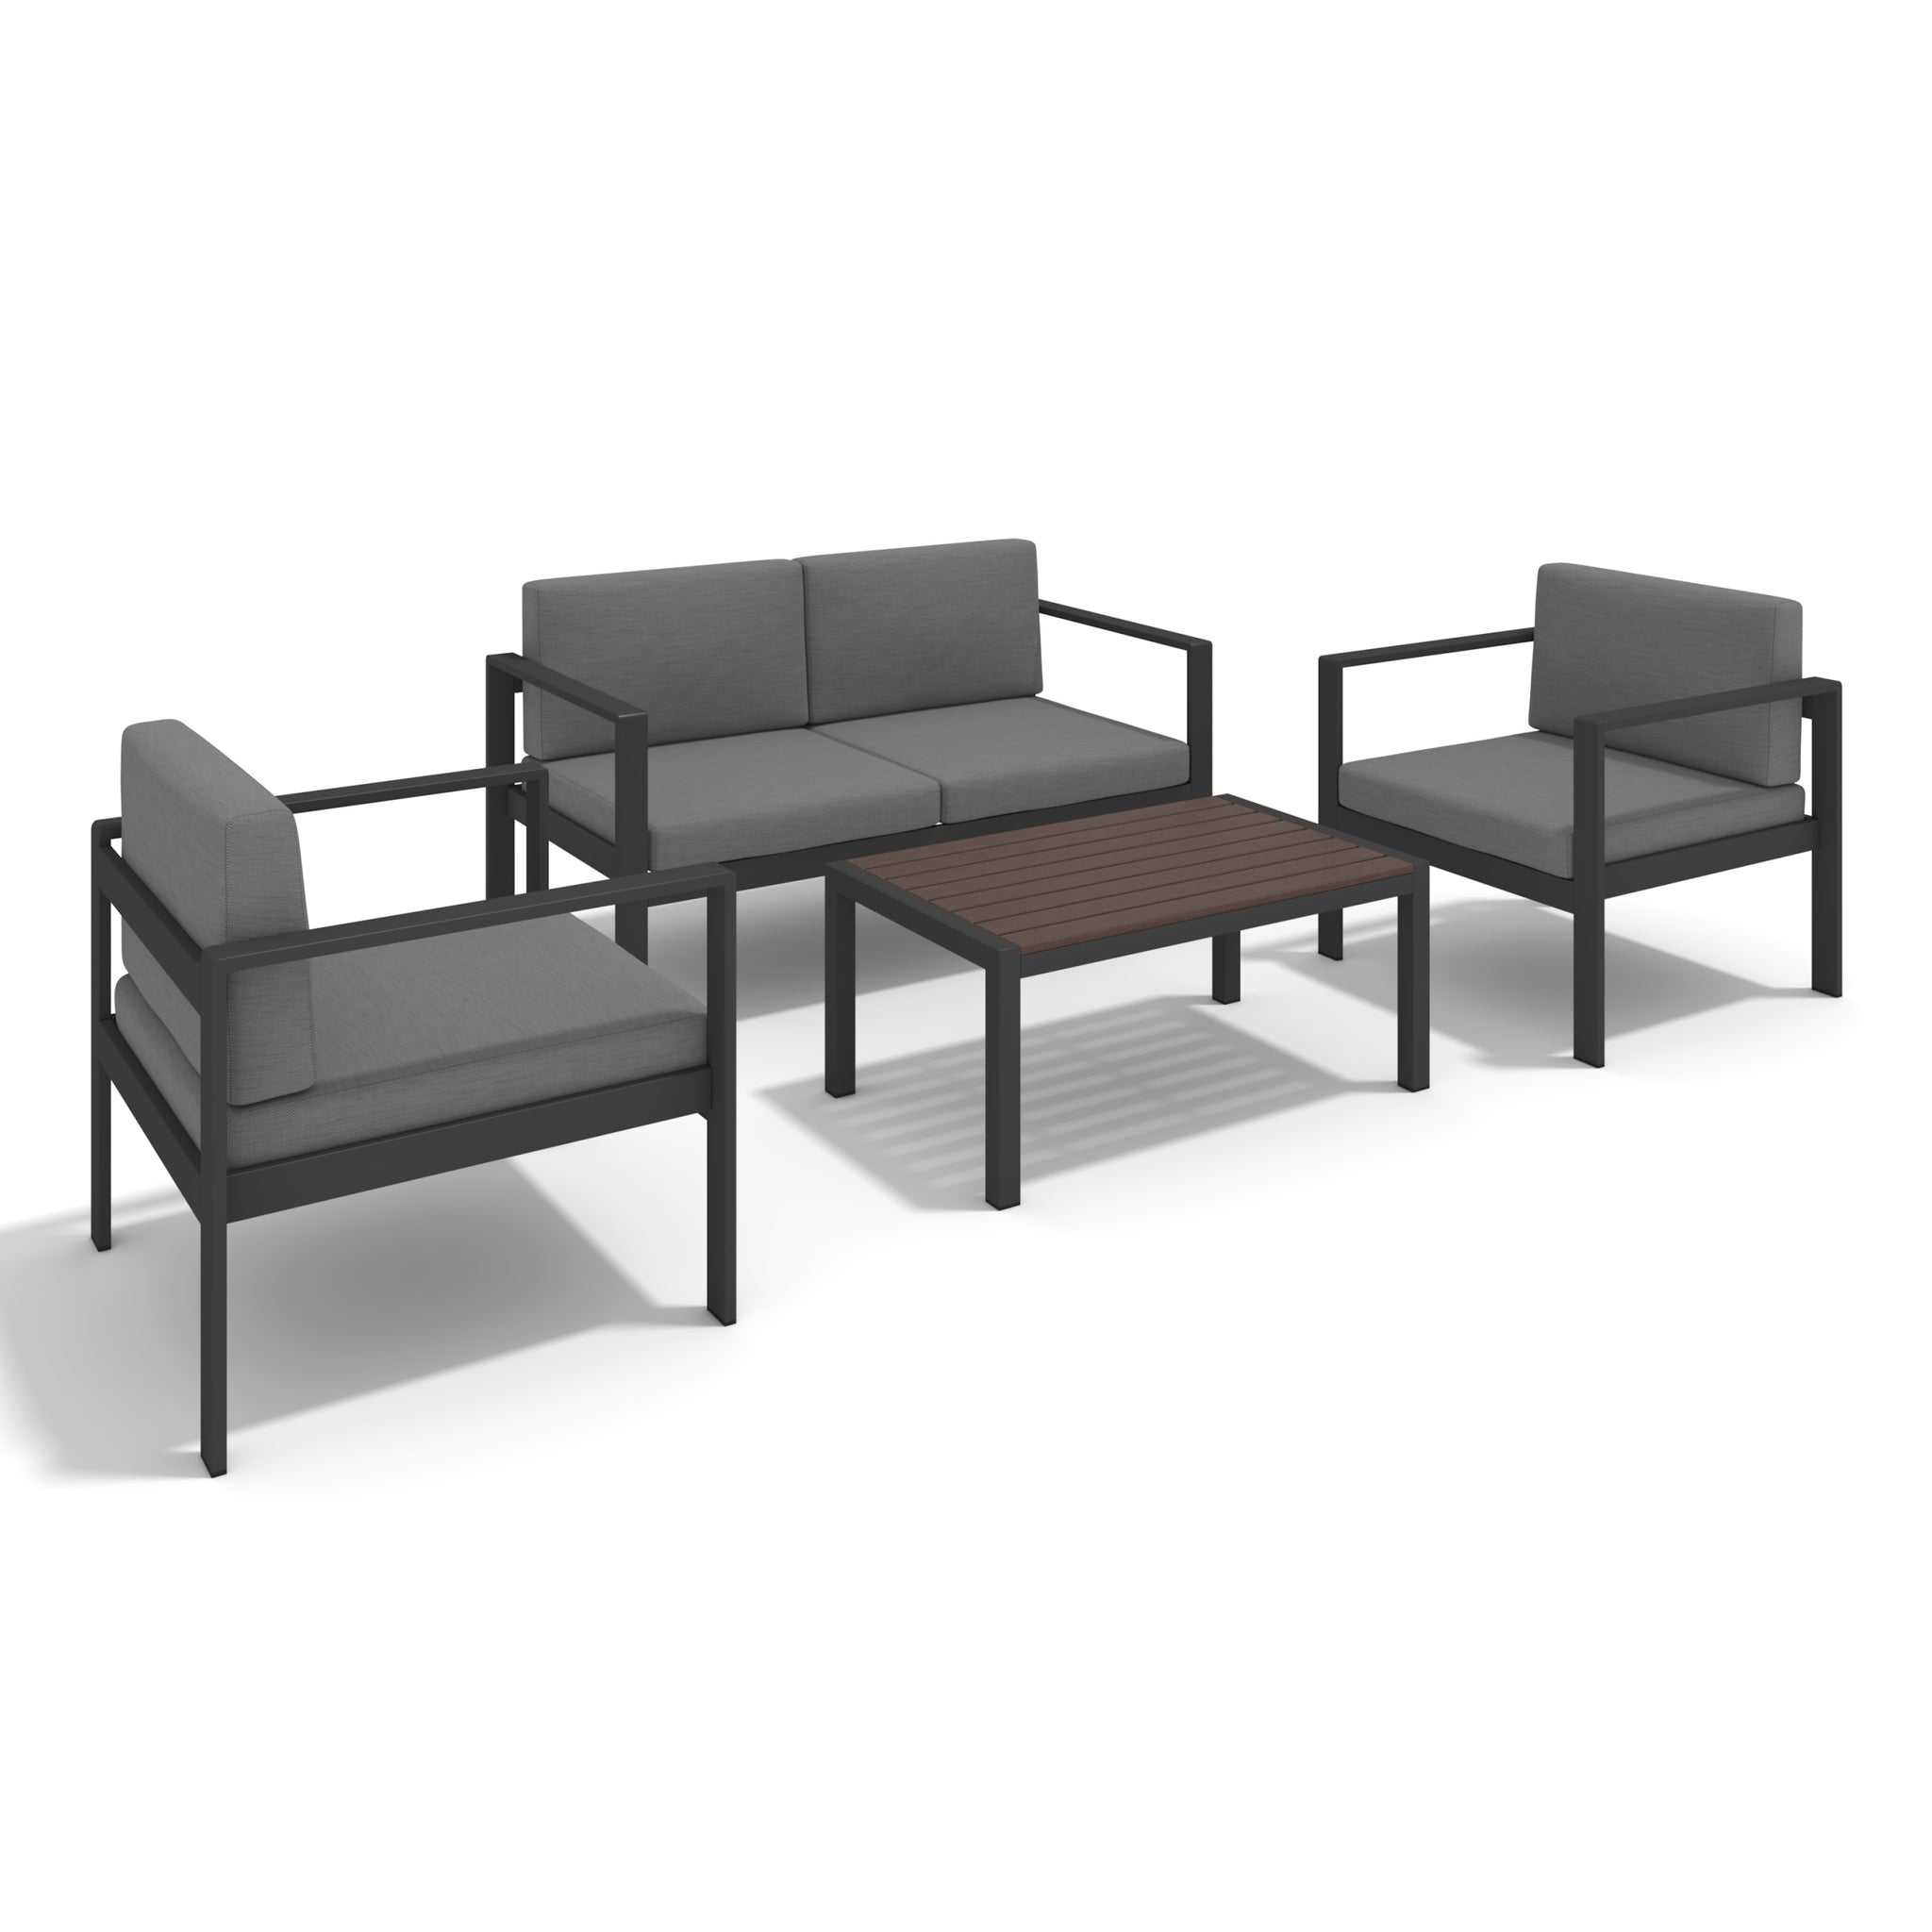 Aluminum Modern 4 Piece Sofa Seating Group For Patio yes-complete patio set-black-mildew resistant